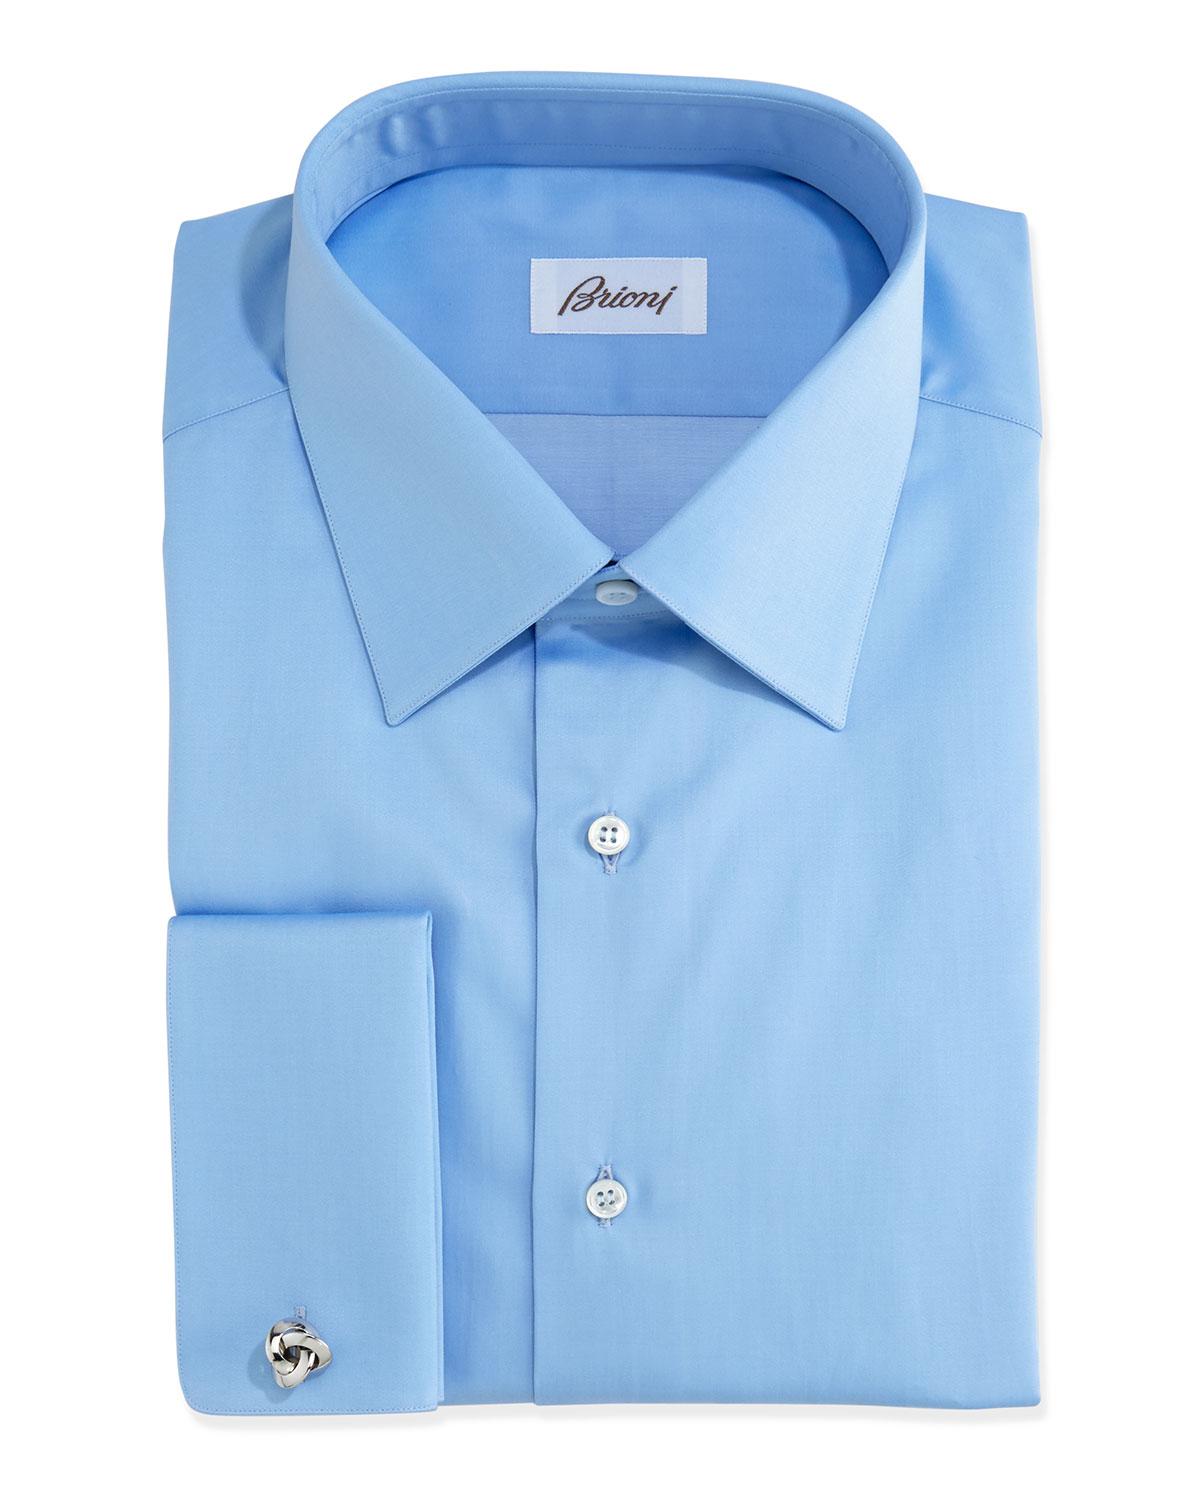 Brioni Solid French-cuff Dress Shirt, Blue for Men - Save 10% - Lyst